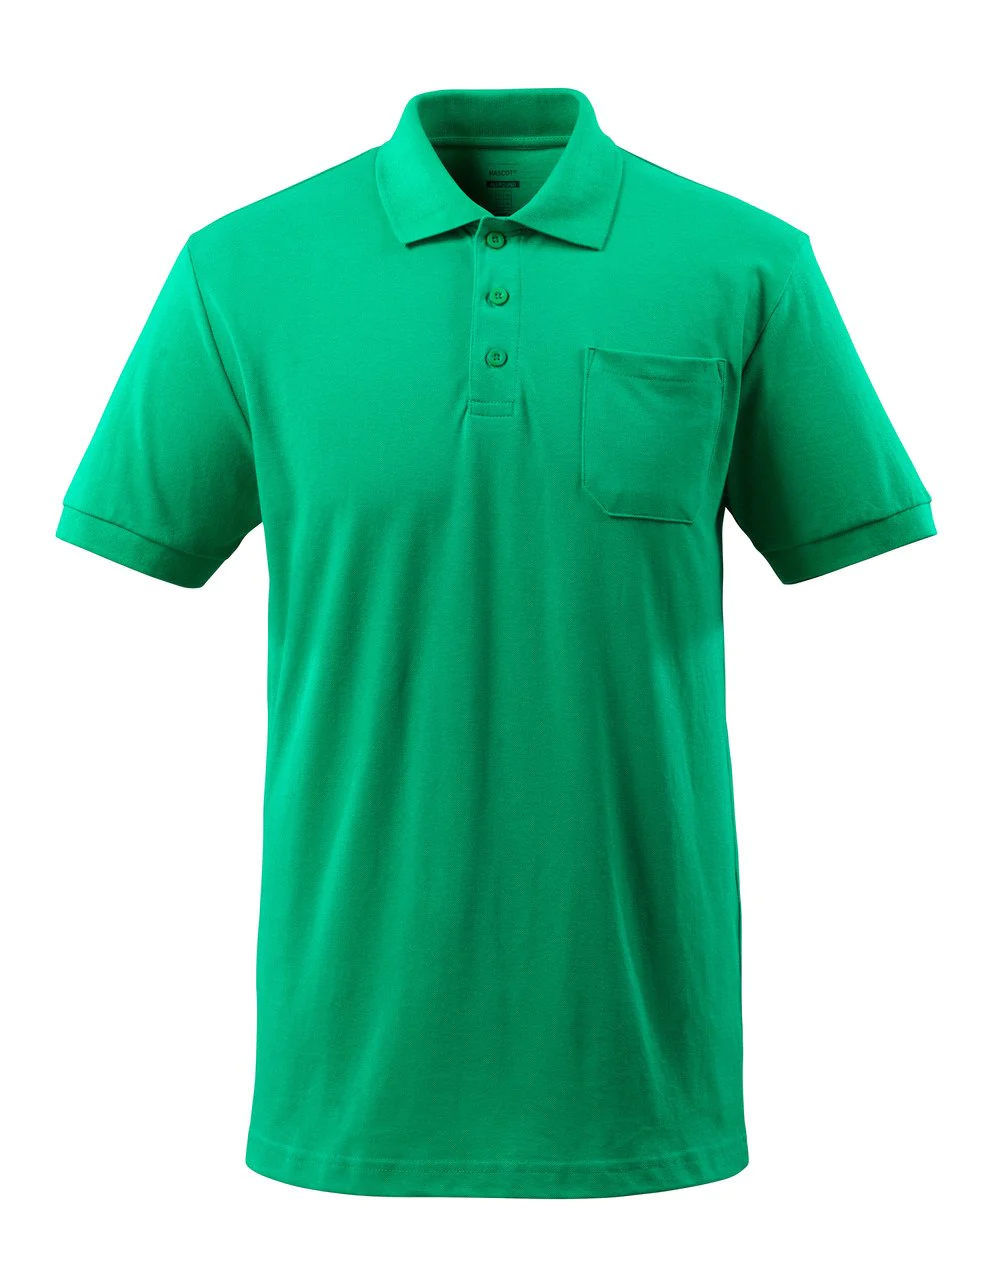 Dry-fit T-shirt - Bangladesh Factory, Suppliers, Manufacturers